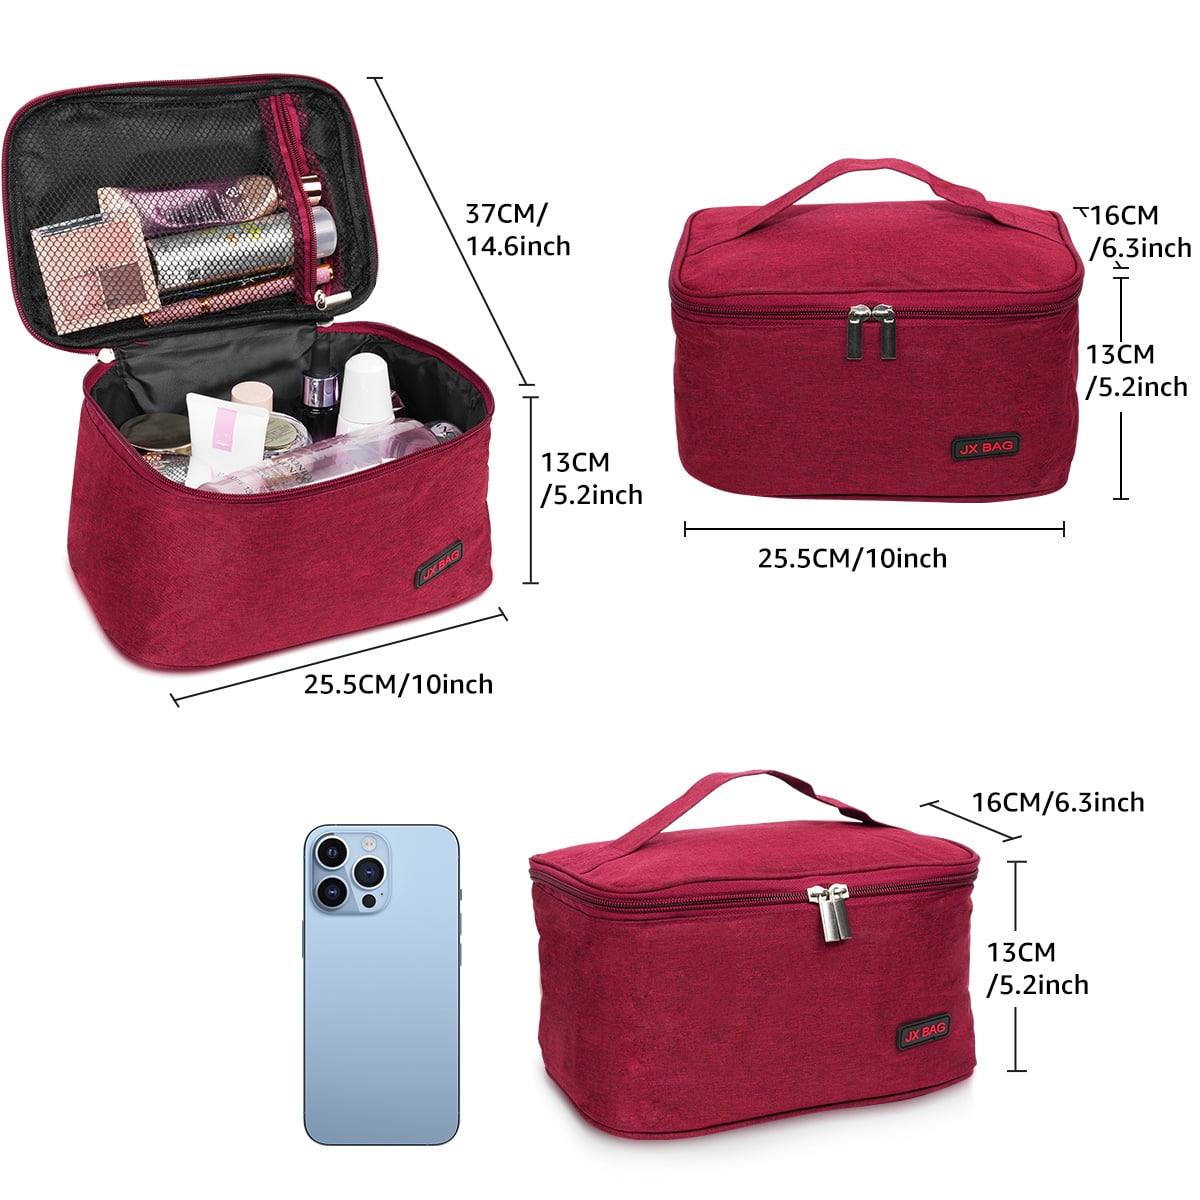 UP to 40% Off TS Swiftie Gifts,Taylor Swift Makeup Bag, Taylor Swift Gifts,  Makeup Bag Styles Portable Travel Cosmetic Bag for Women Flower 